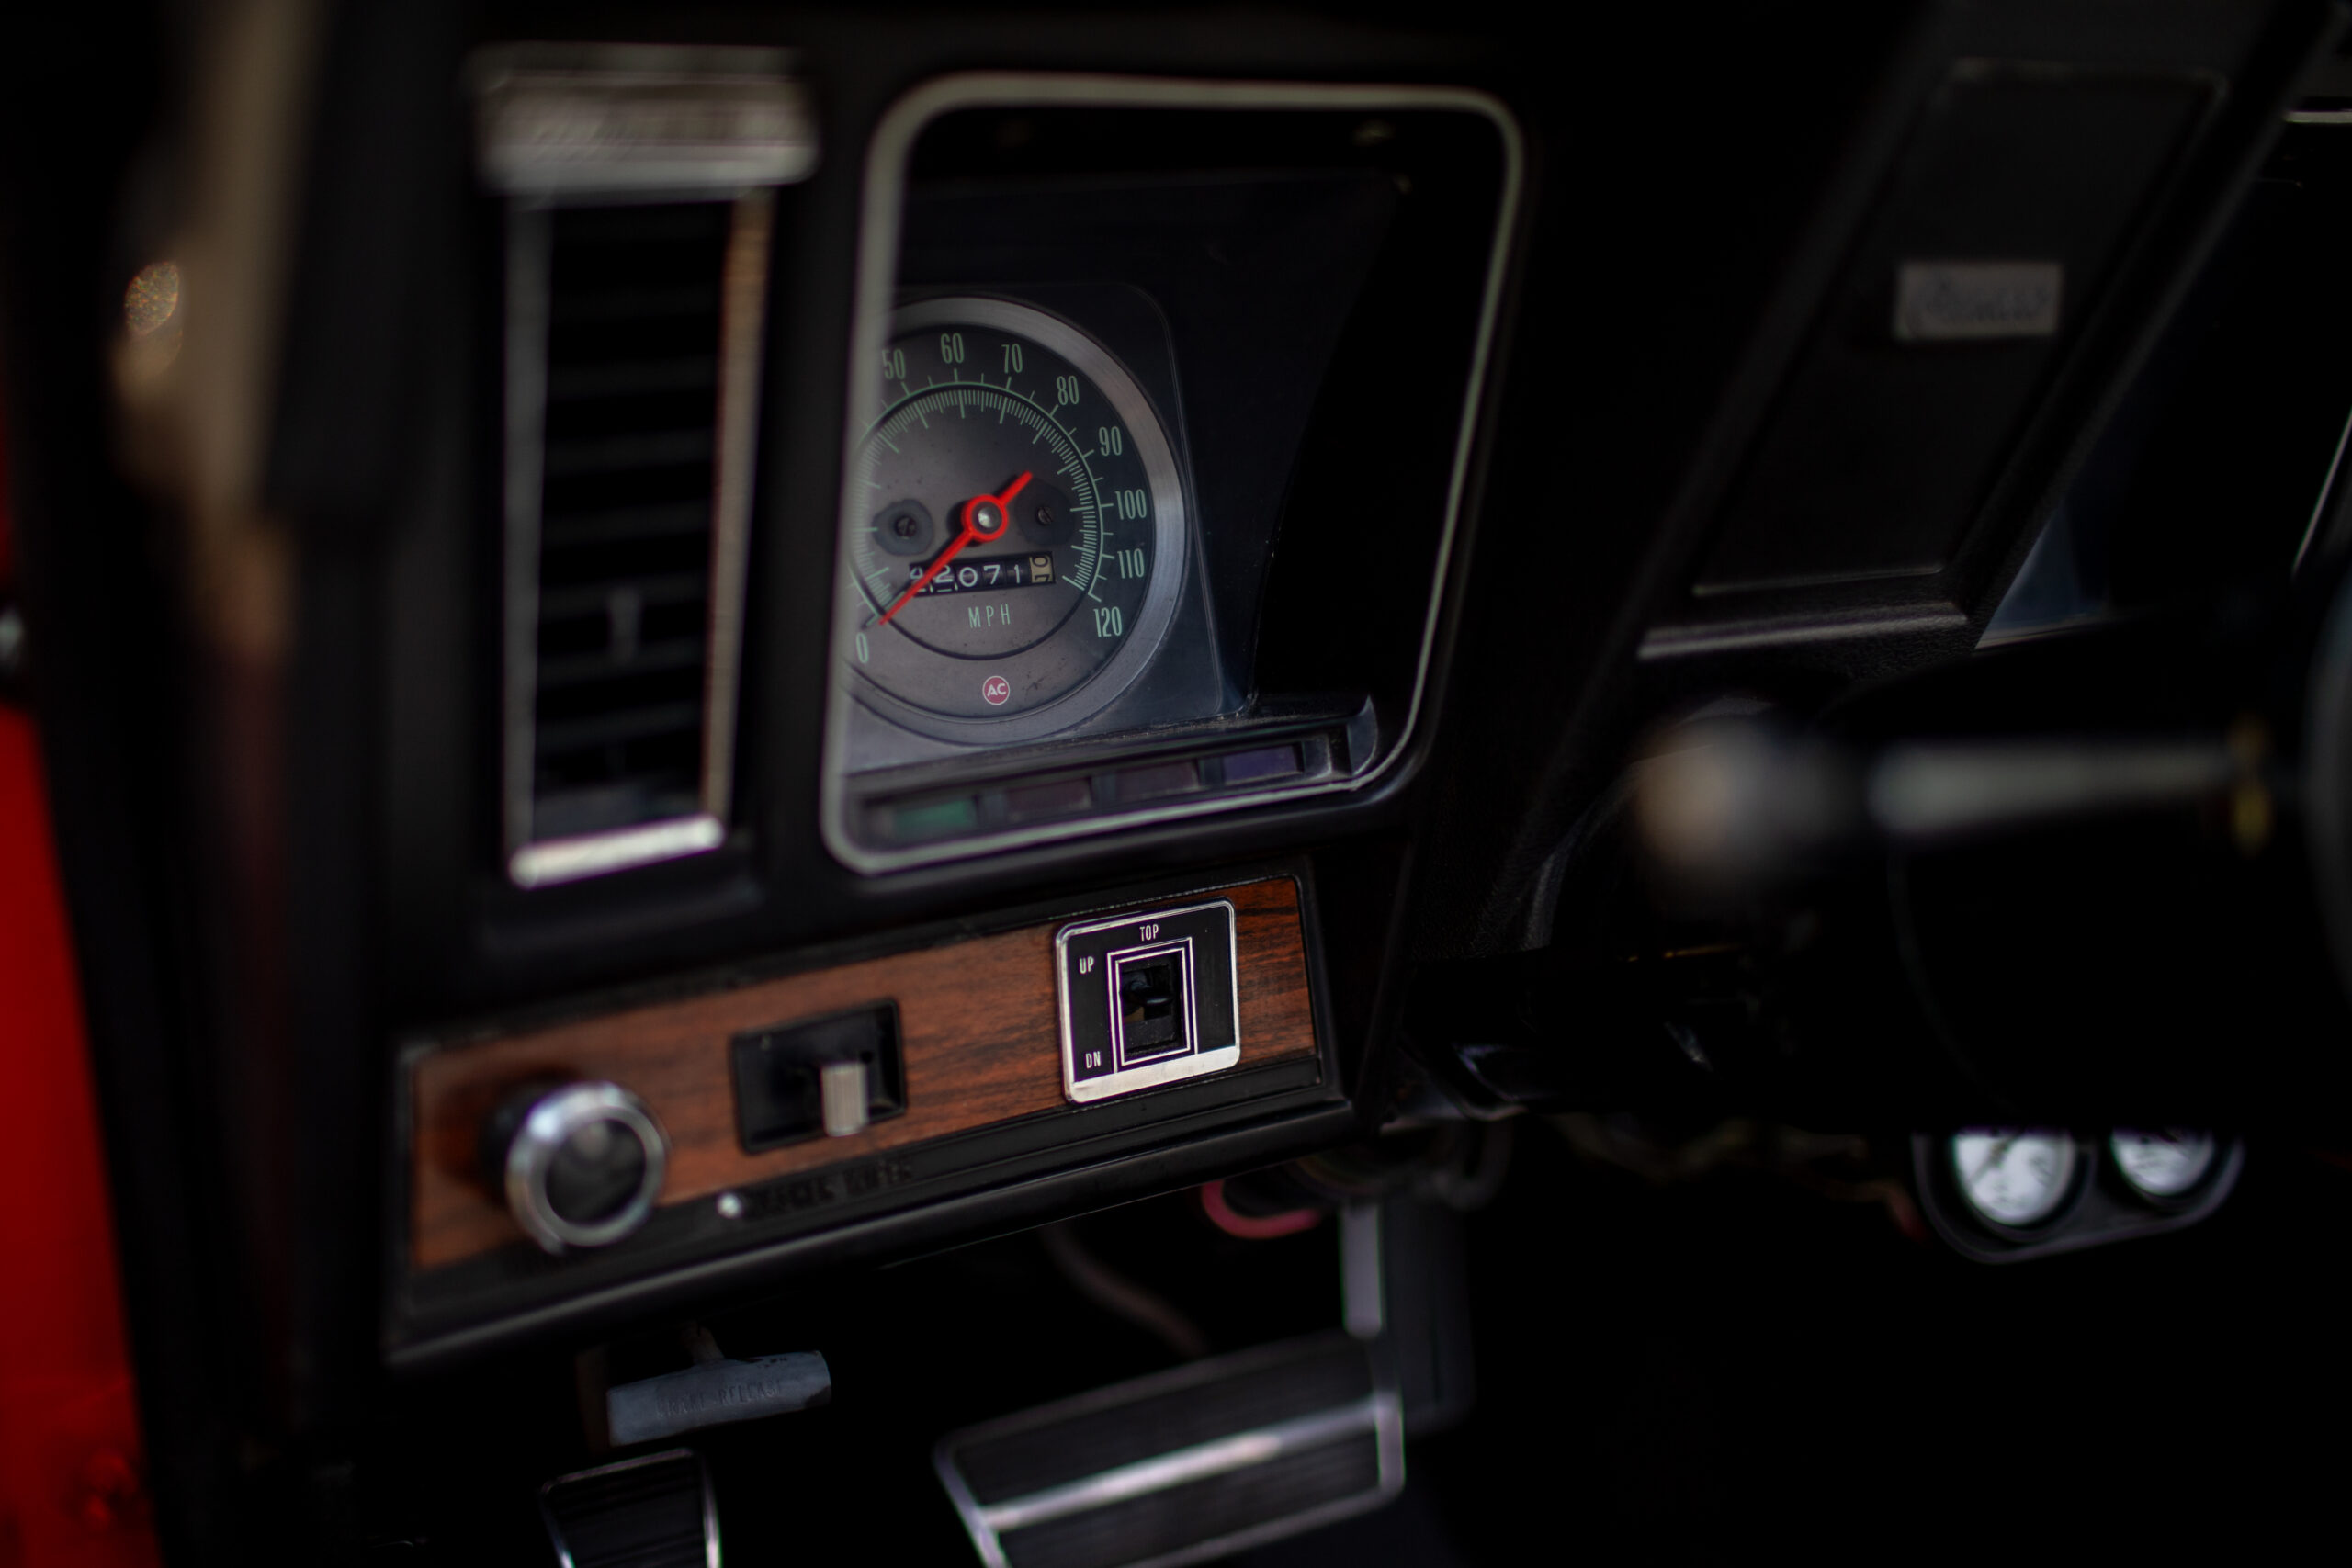 Close-up view of a classic car dashboard showing a speedometer with a red needle, a wooden panel with buttons and knobs, and parts of the steering wheel and pedal visible.